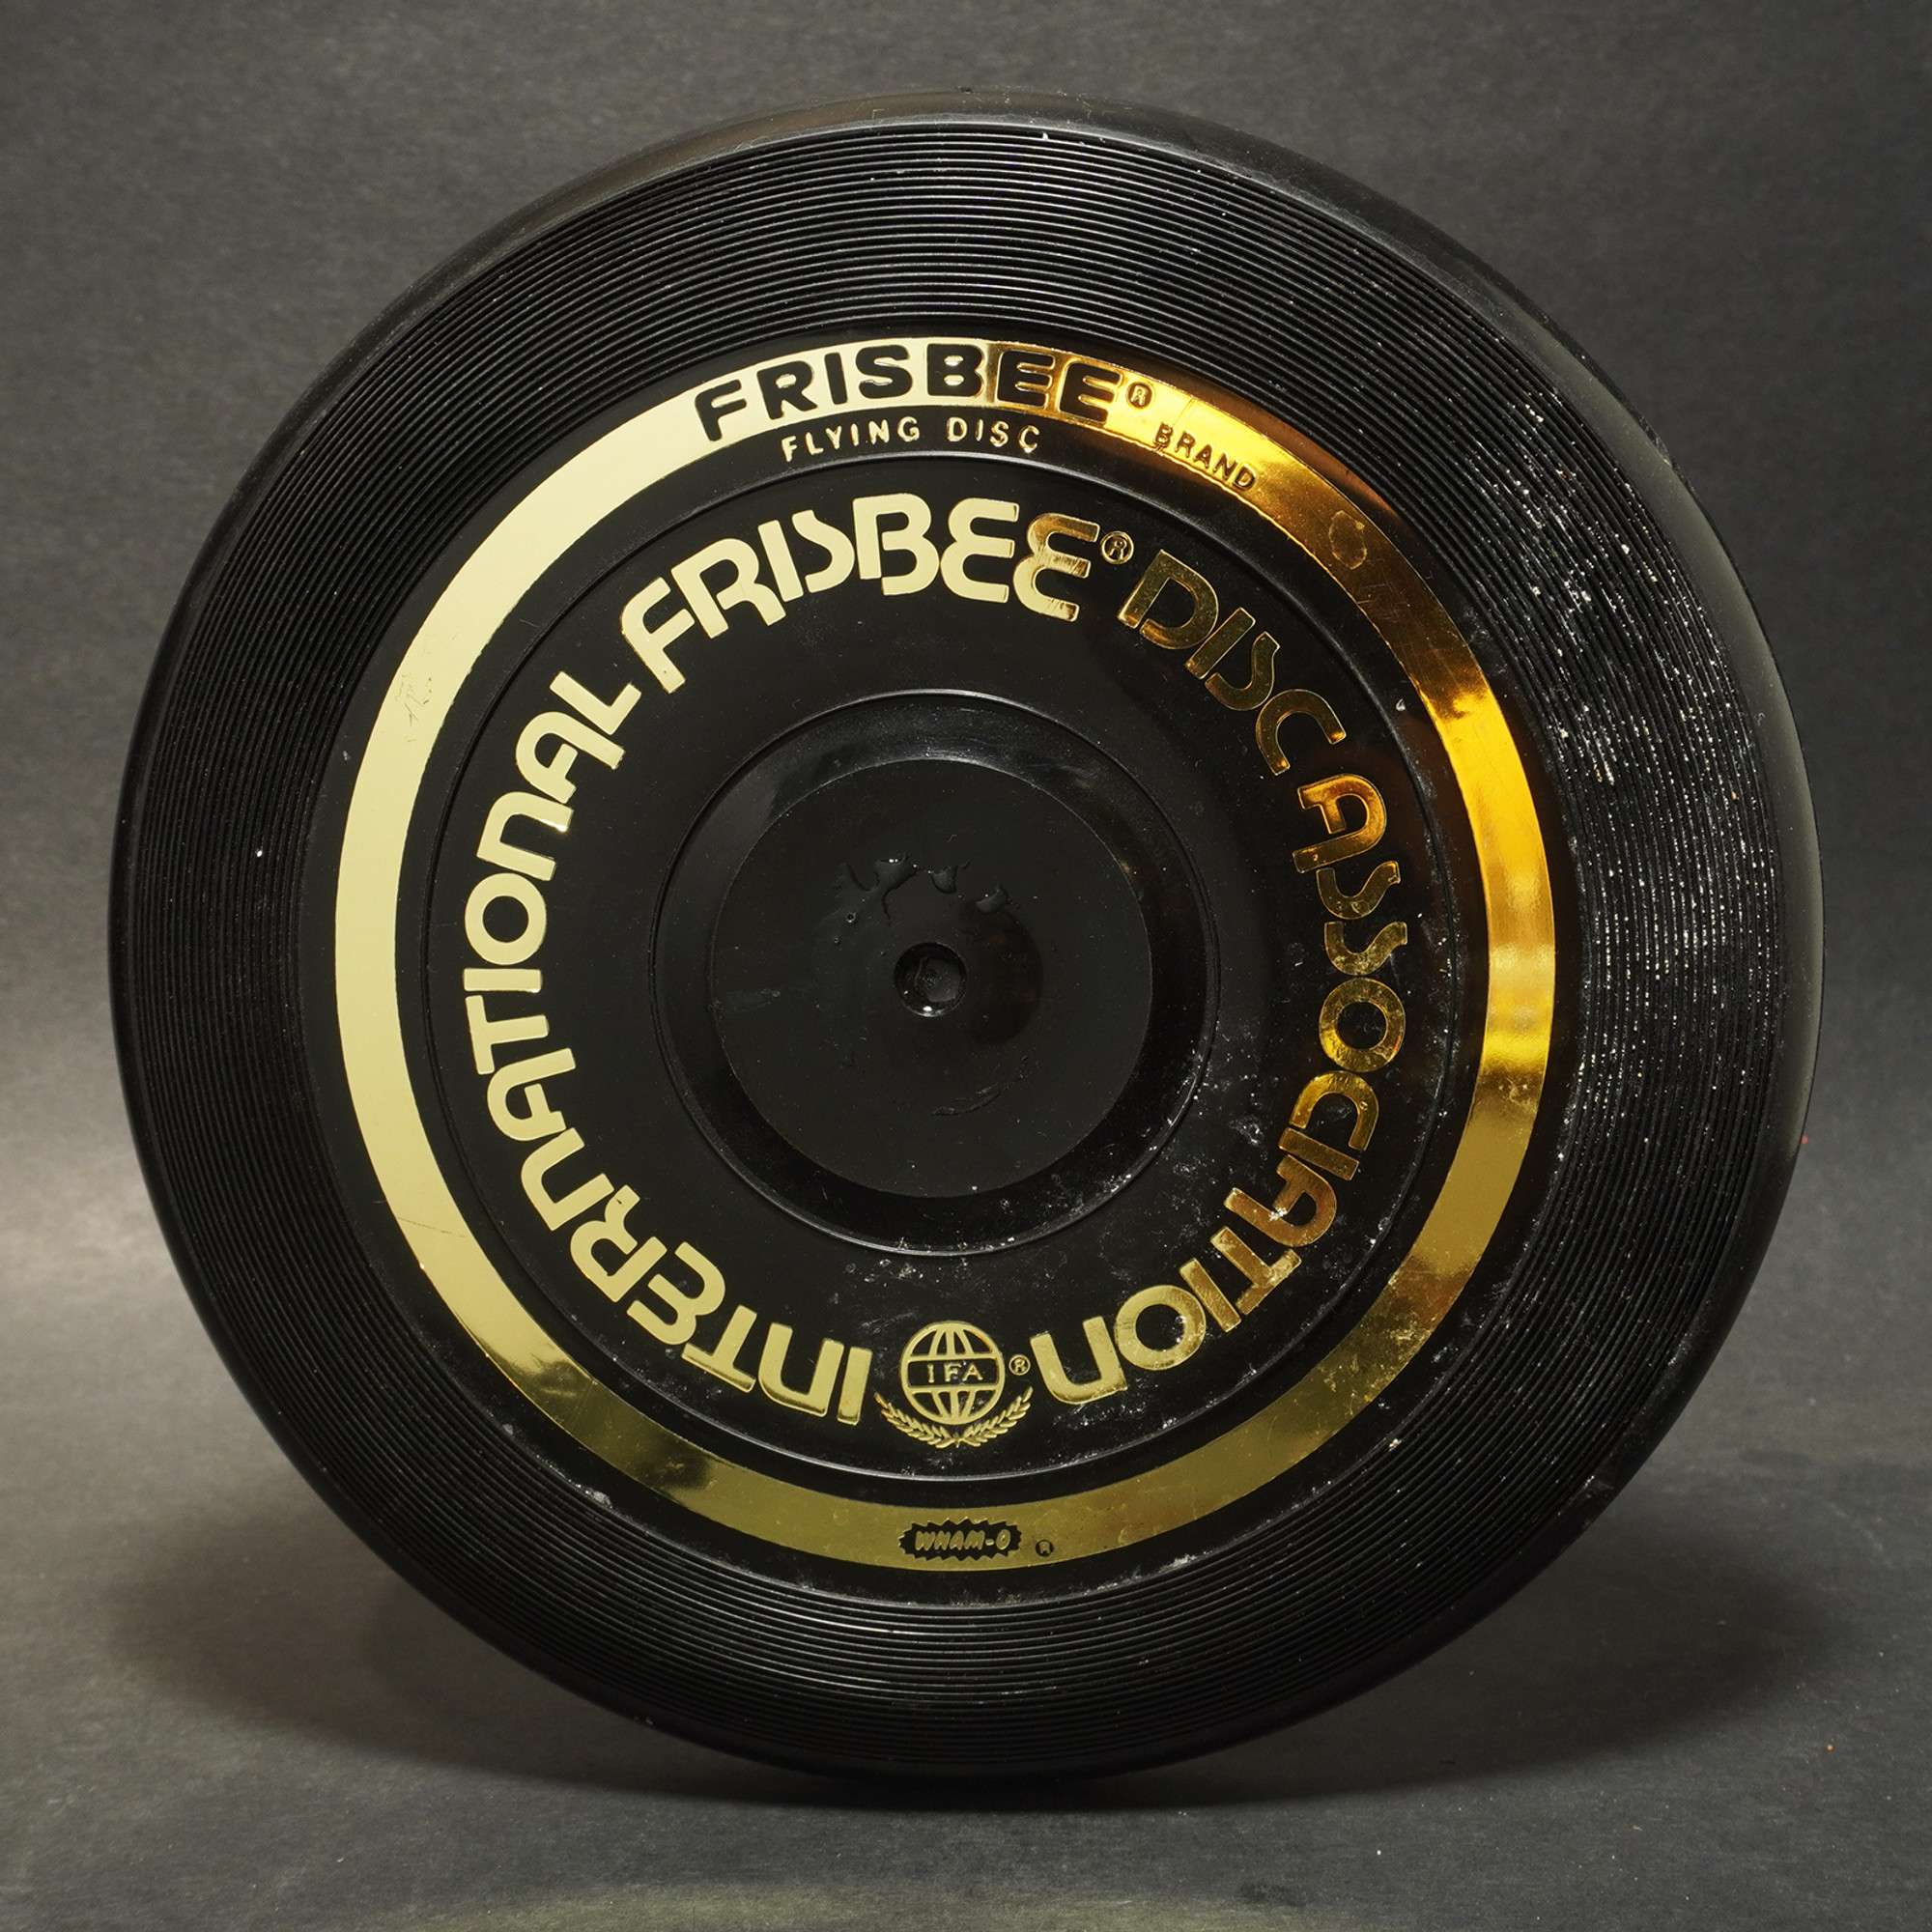 Wham-O Frisbee (Pro Mold 15) Association - no sticker - THE WRIGHT LIFE ACTION SPORTING GOODS STORE